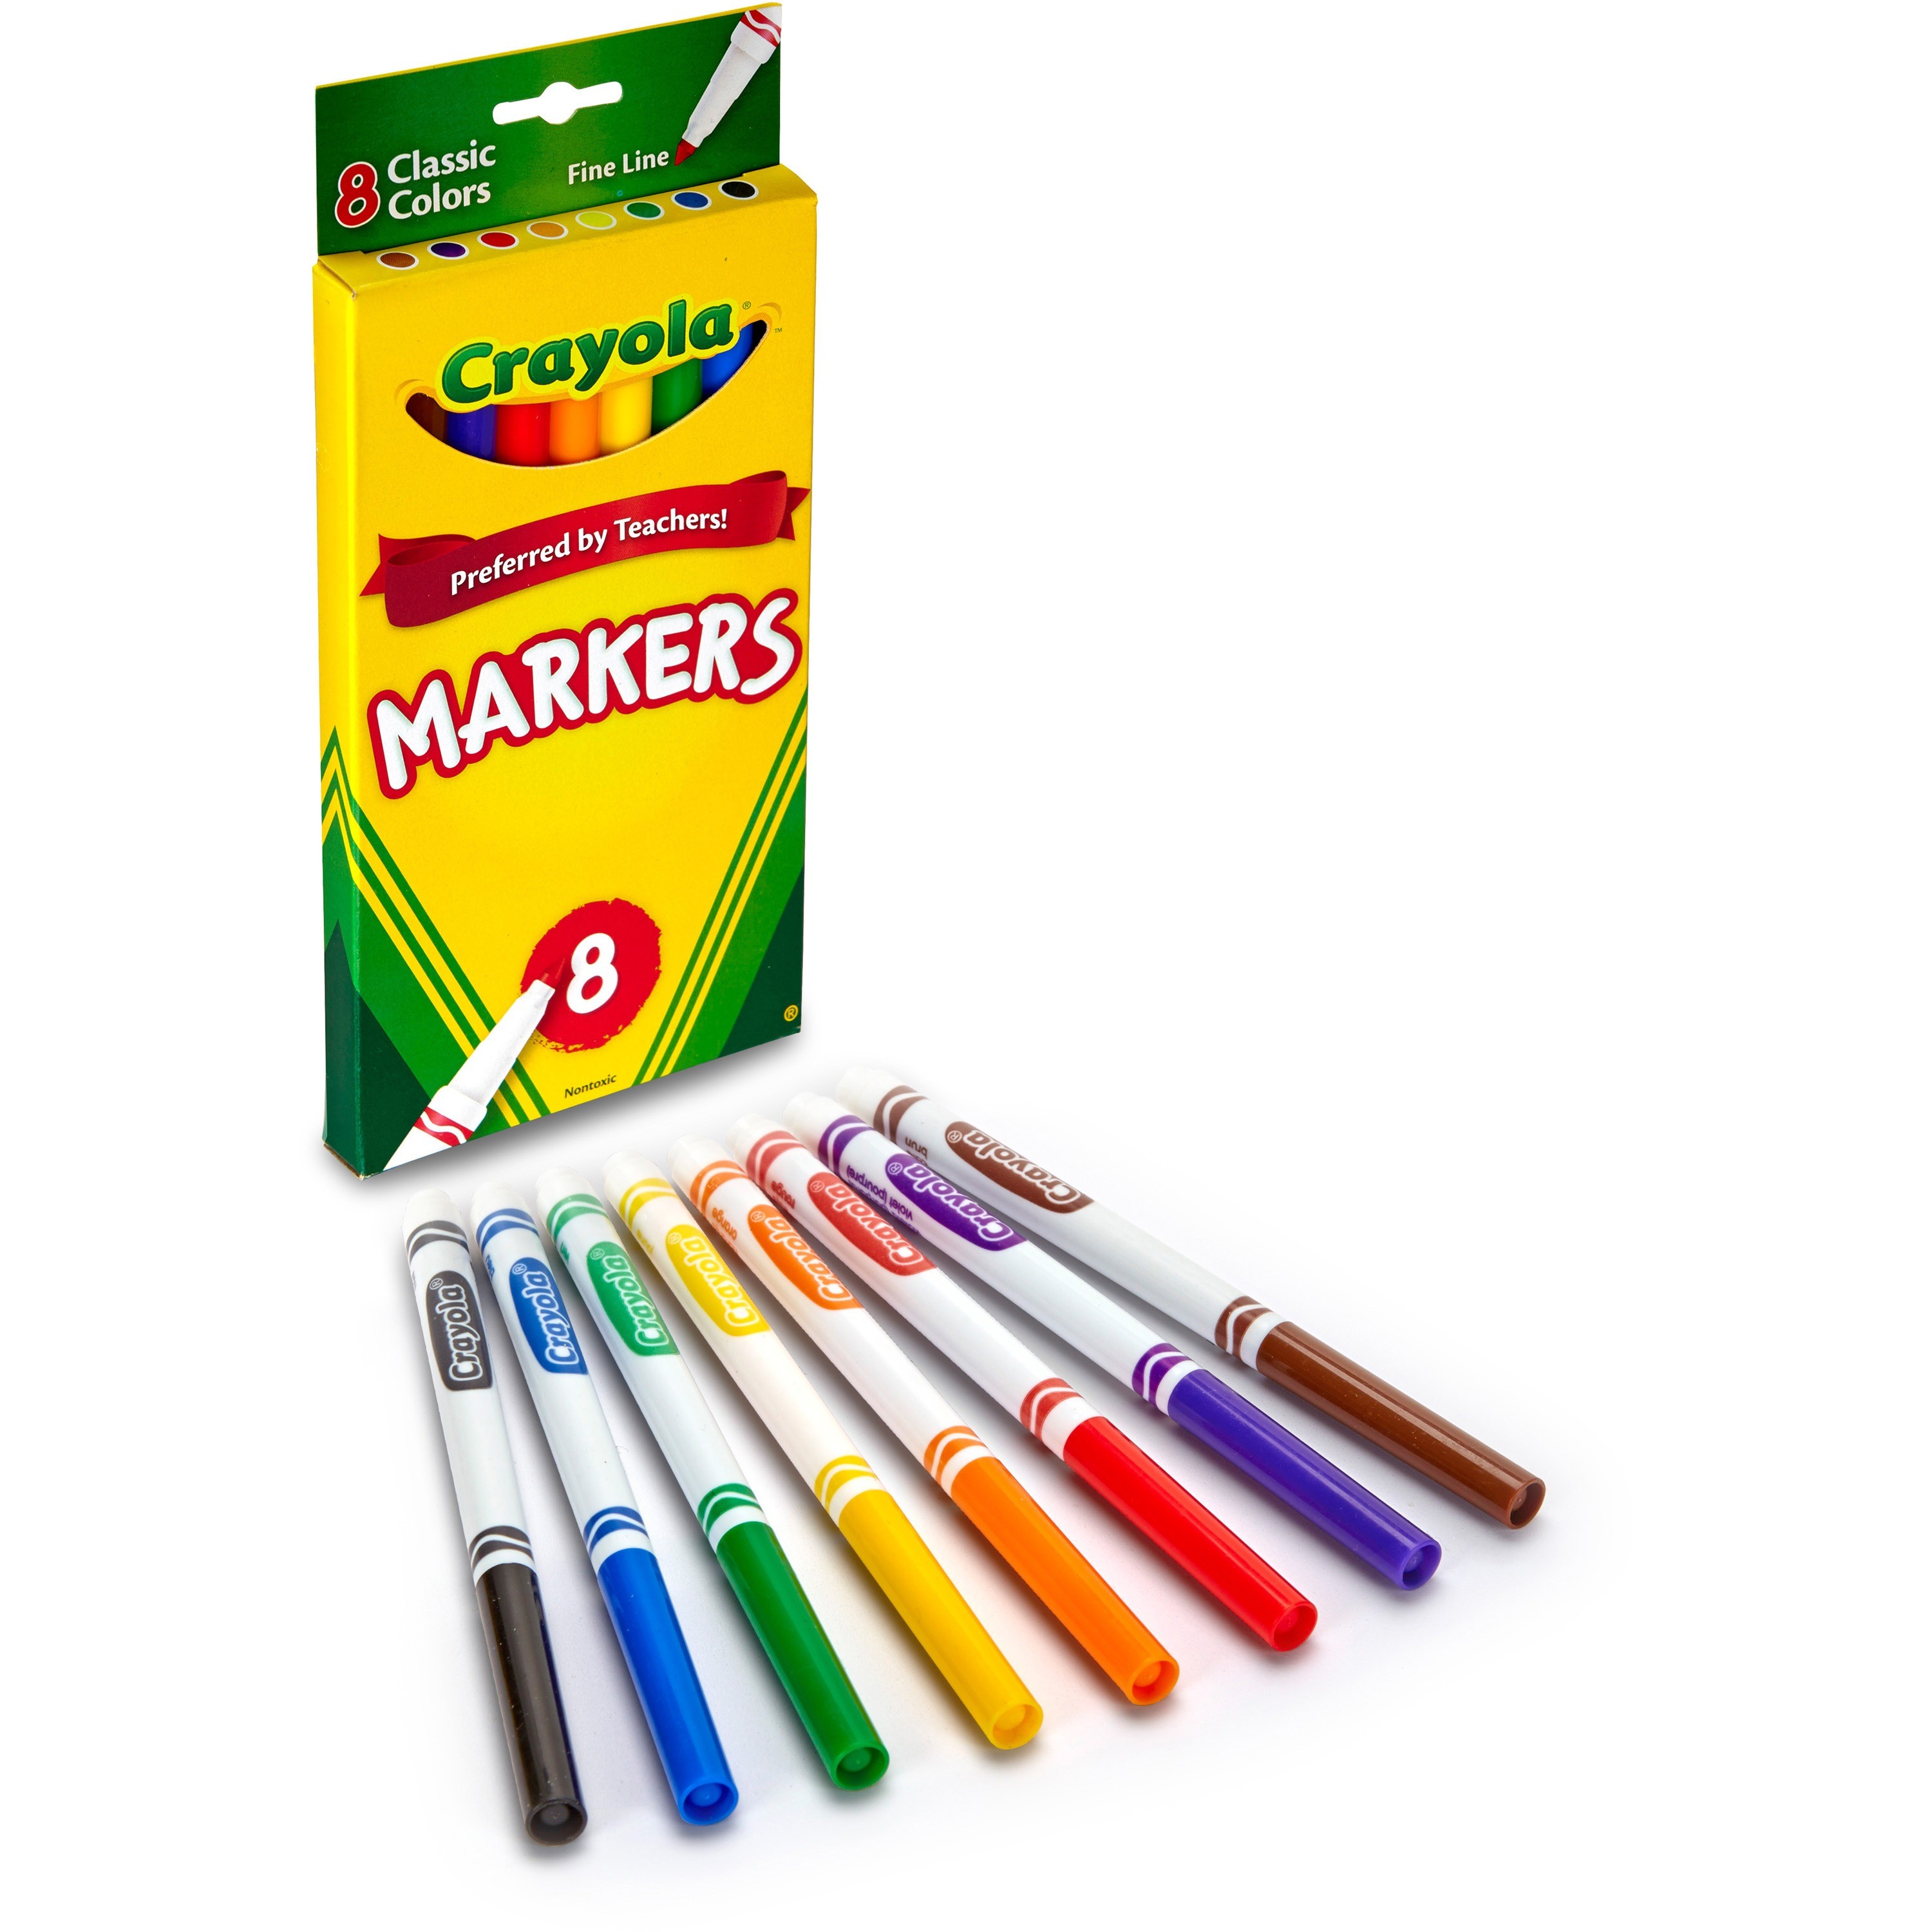 8ct Fine Tip Markers